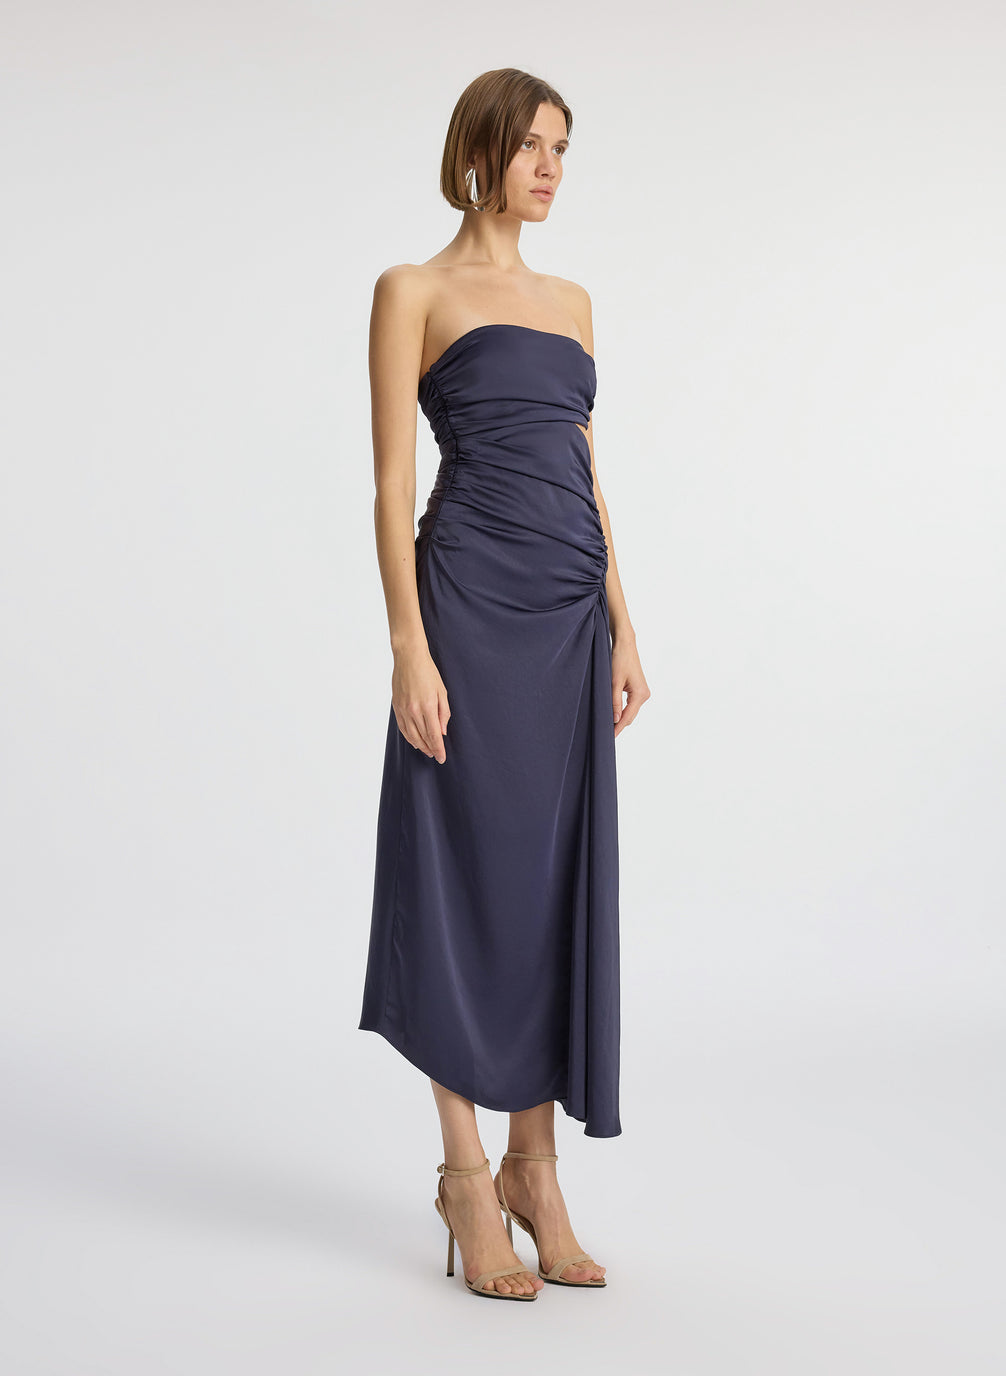 side view of woman wearing navy blue strapless midi dress